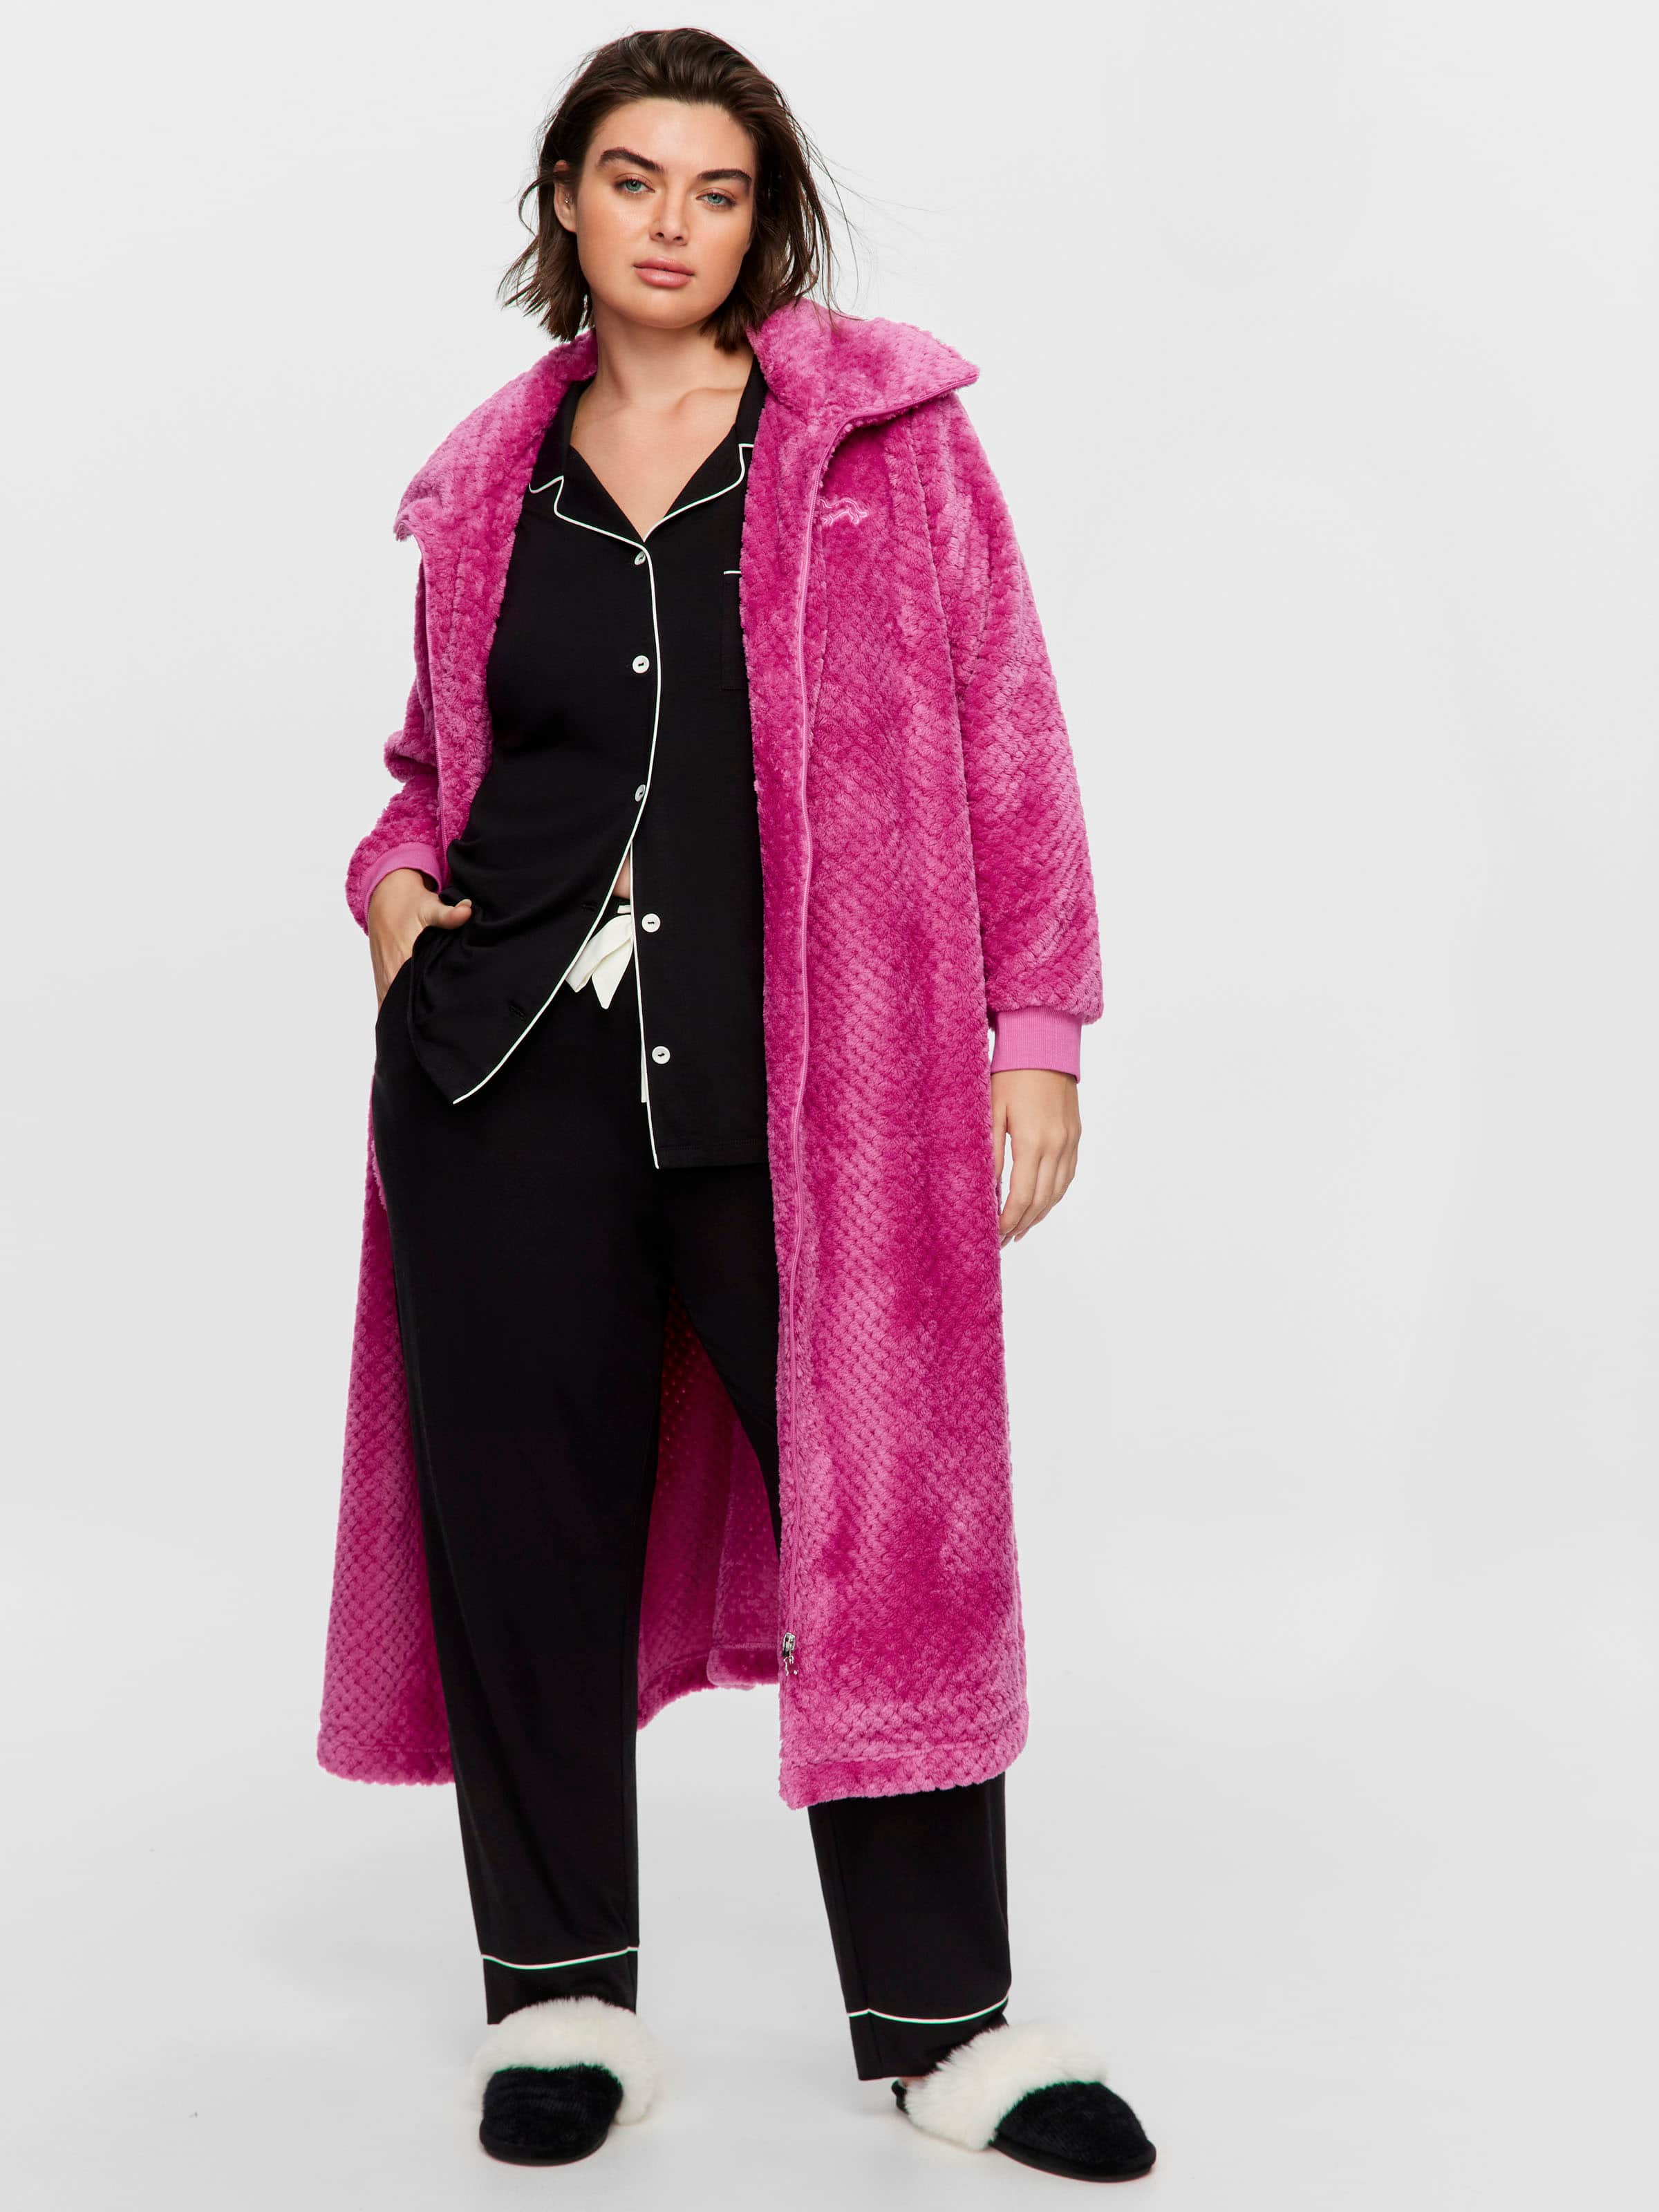 P.A. Plus Raspberry Zip Up Gown